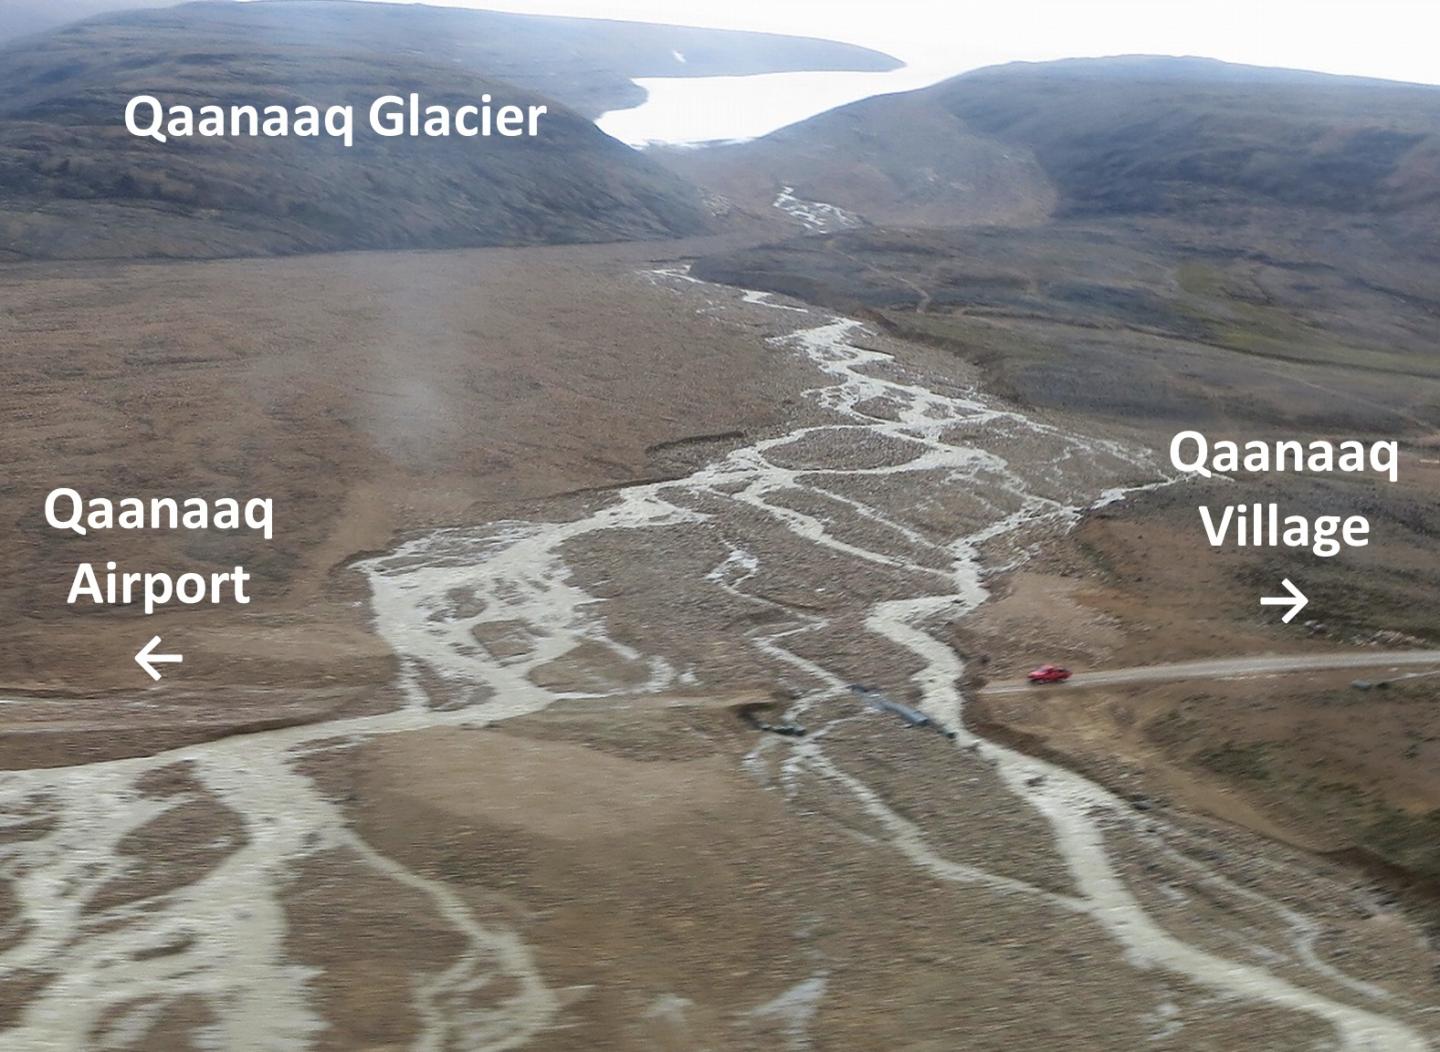 An Outlet Stream from Qaanaaq Glacier Flooded in August 2016